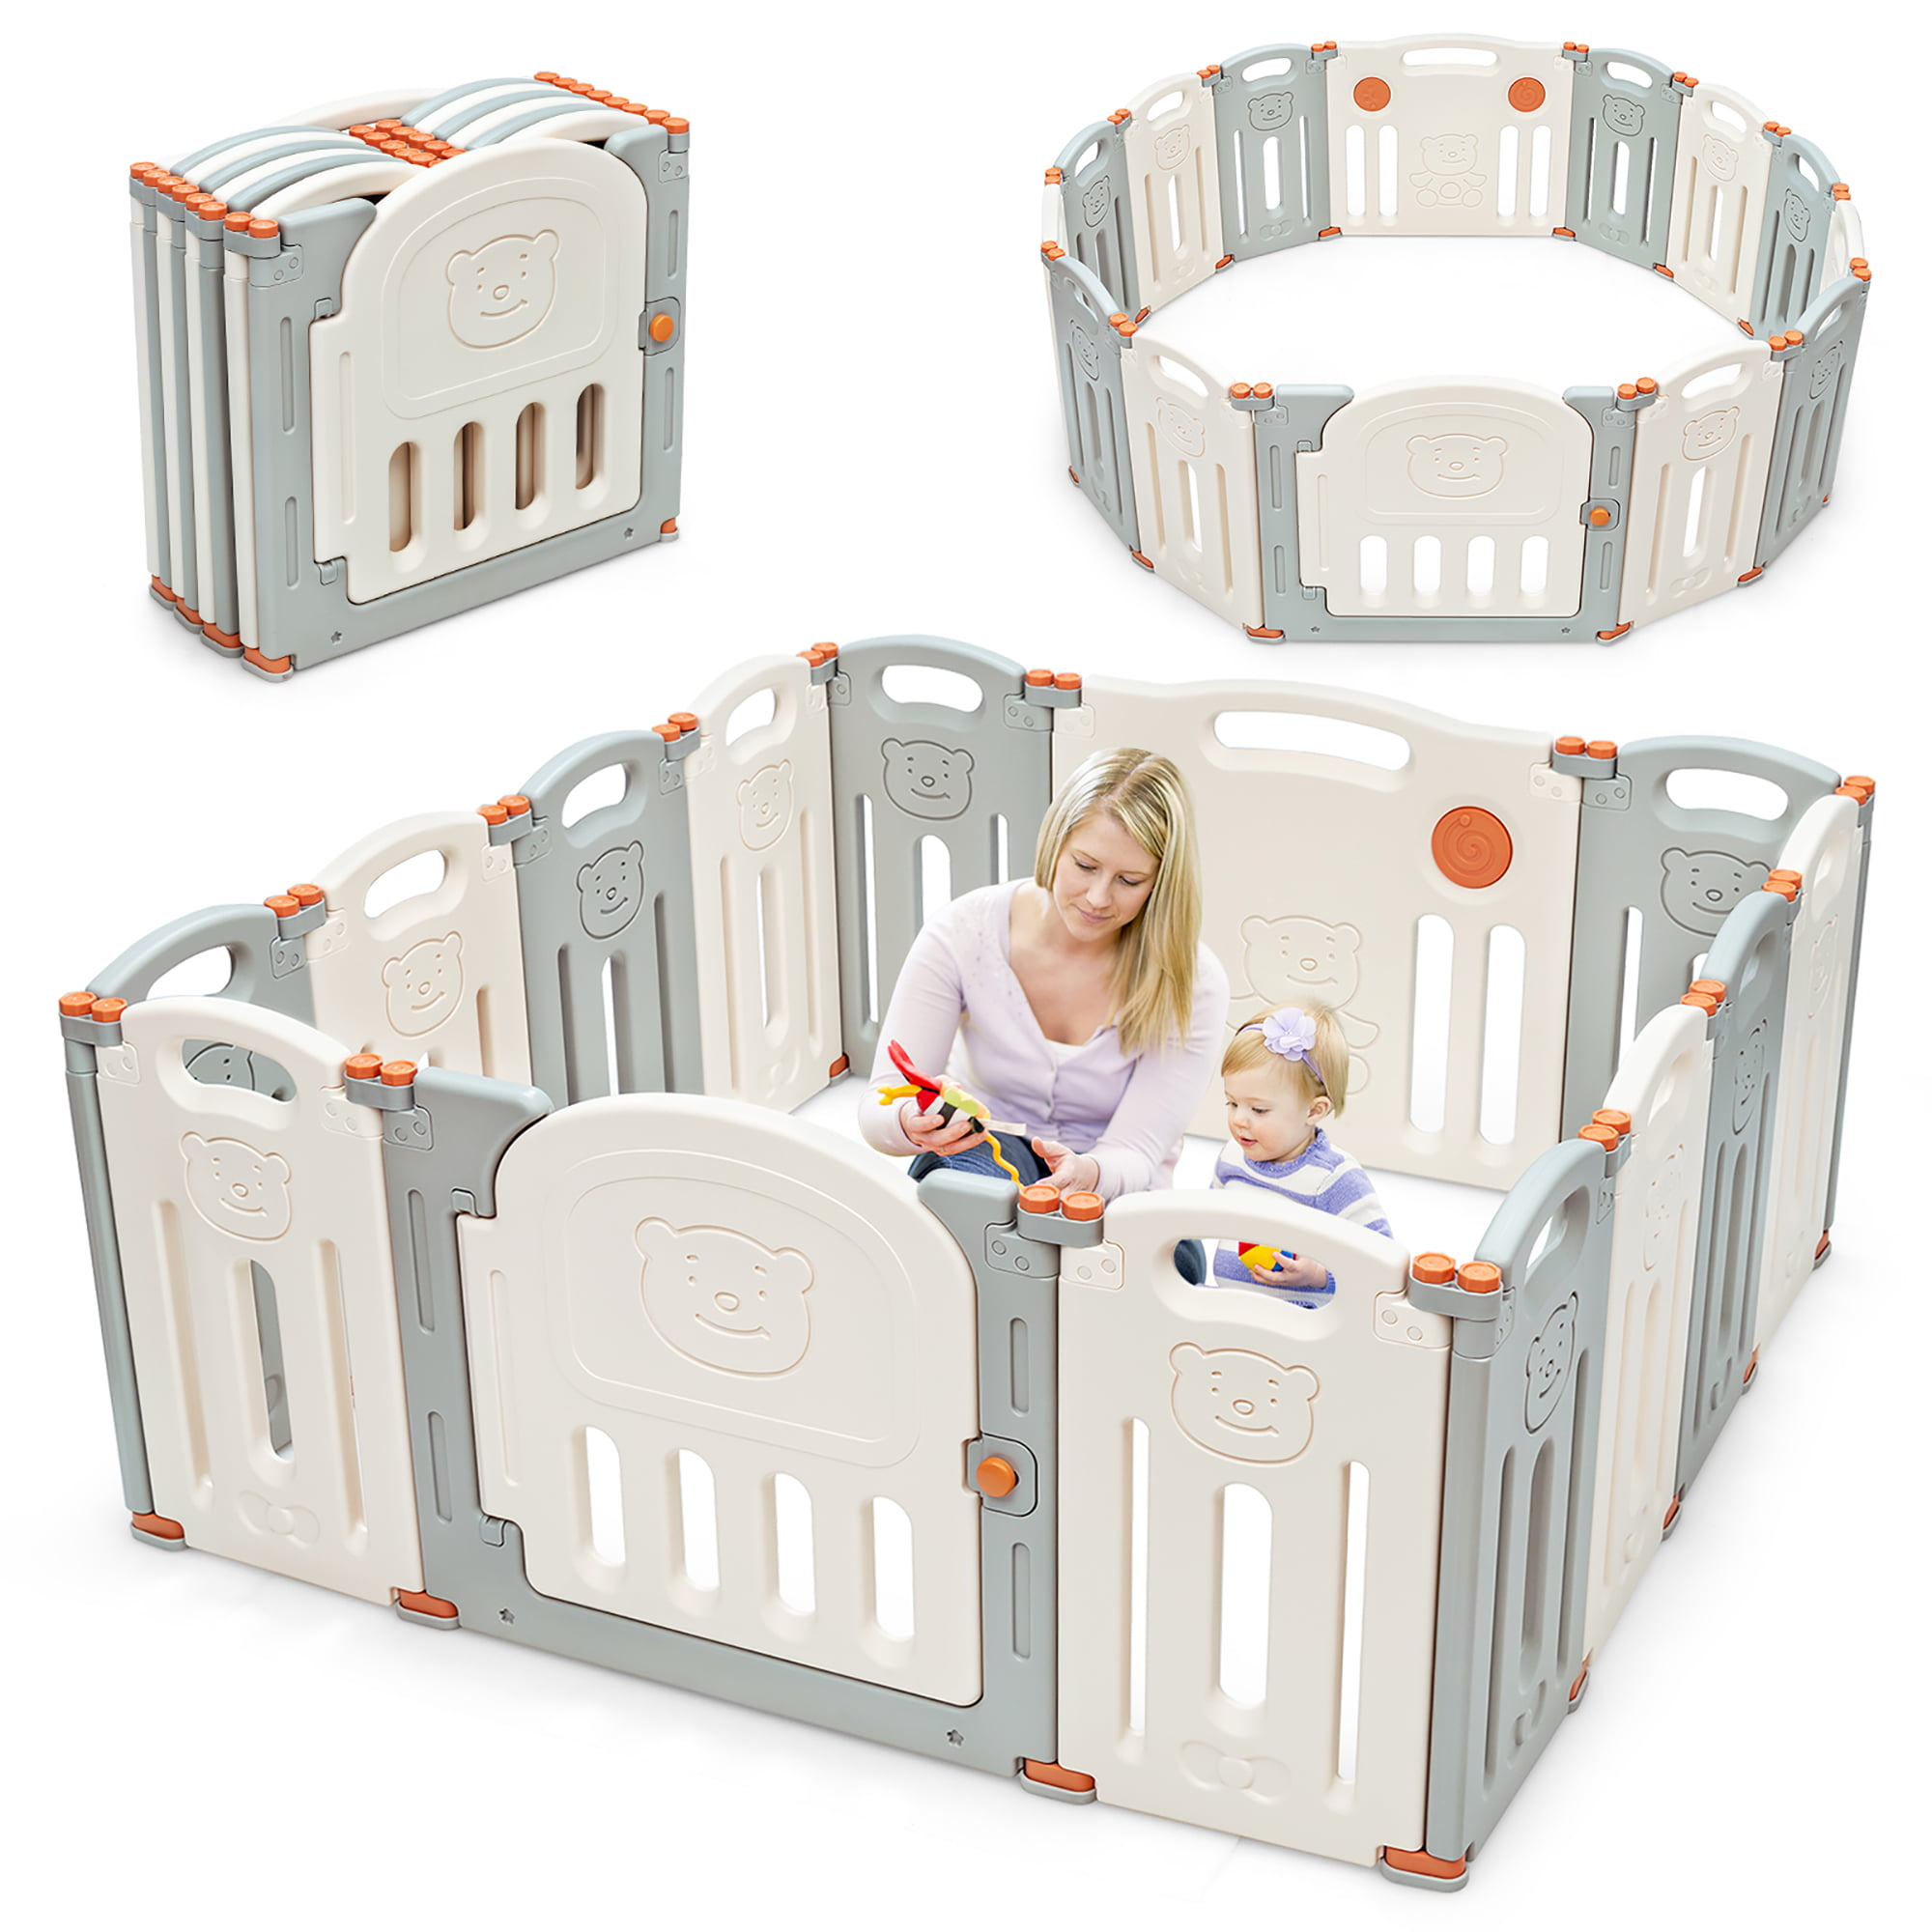 12 Panels Baby Playpen Toddler Safety Adjustable Fence Infant Play Center Yard 